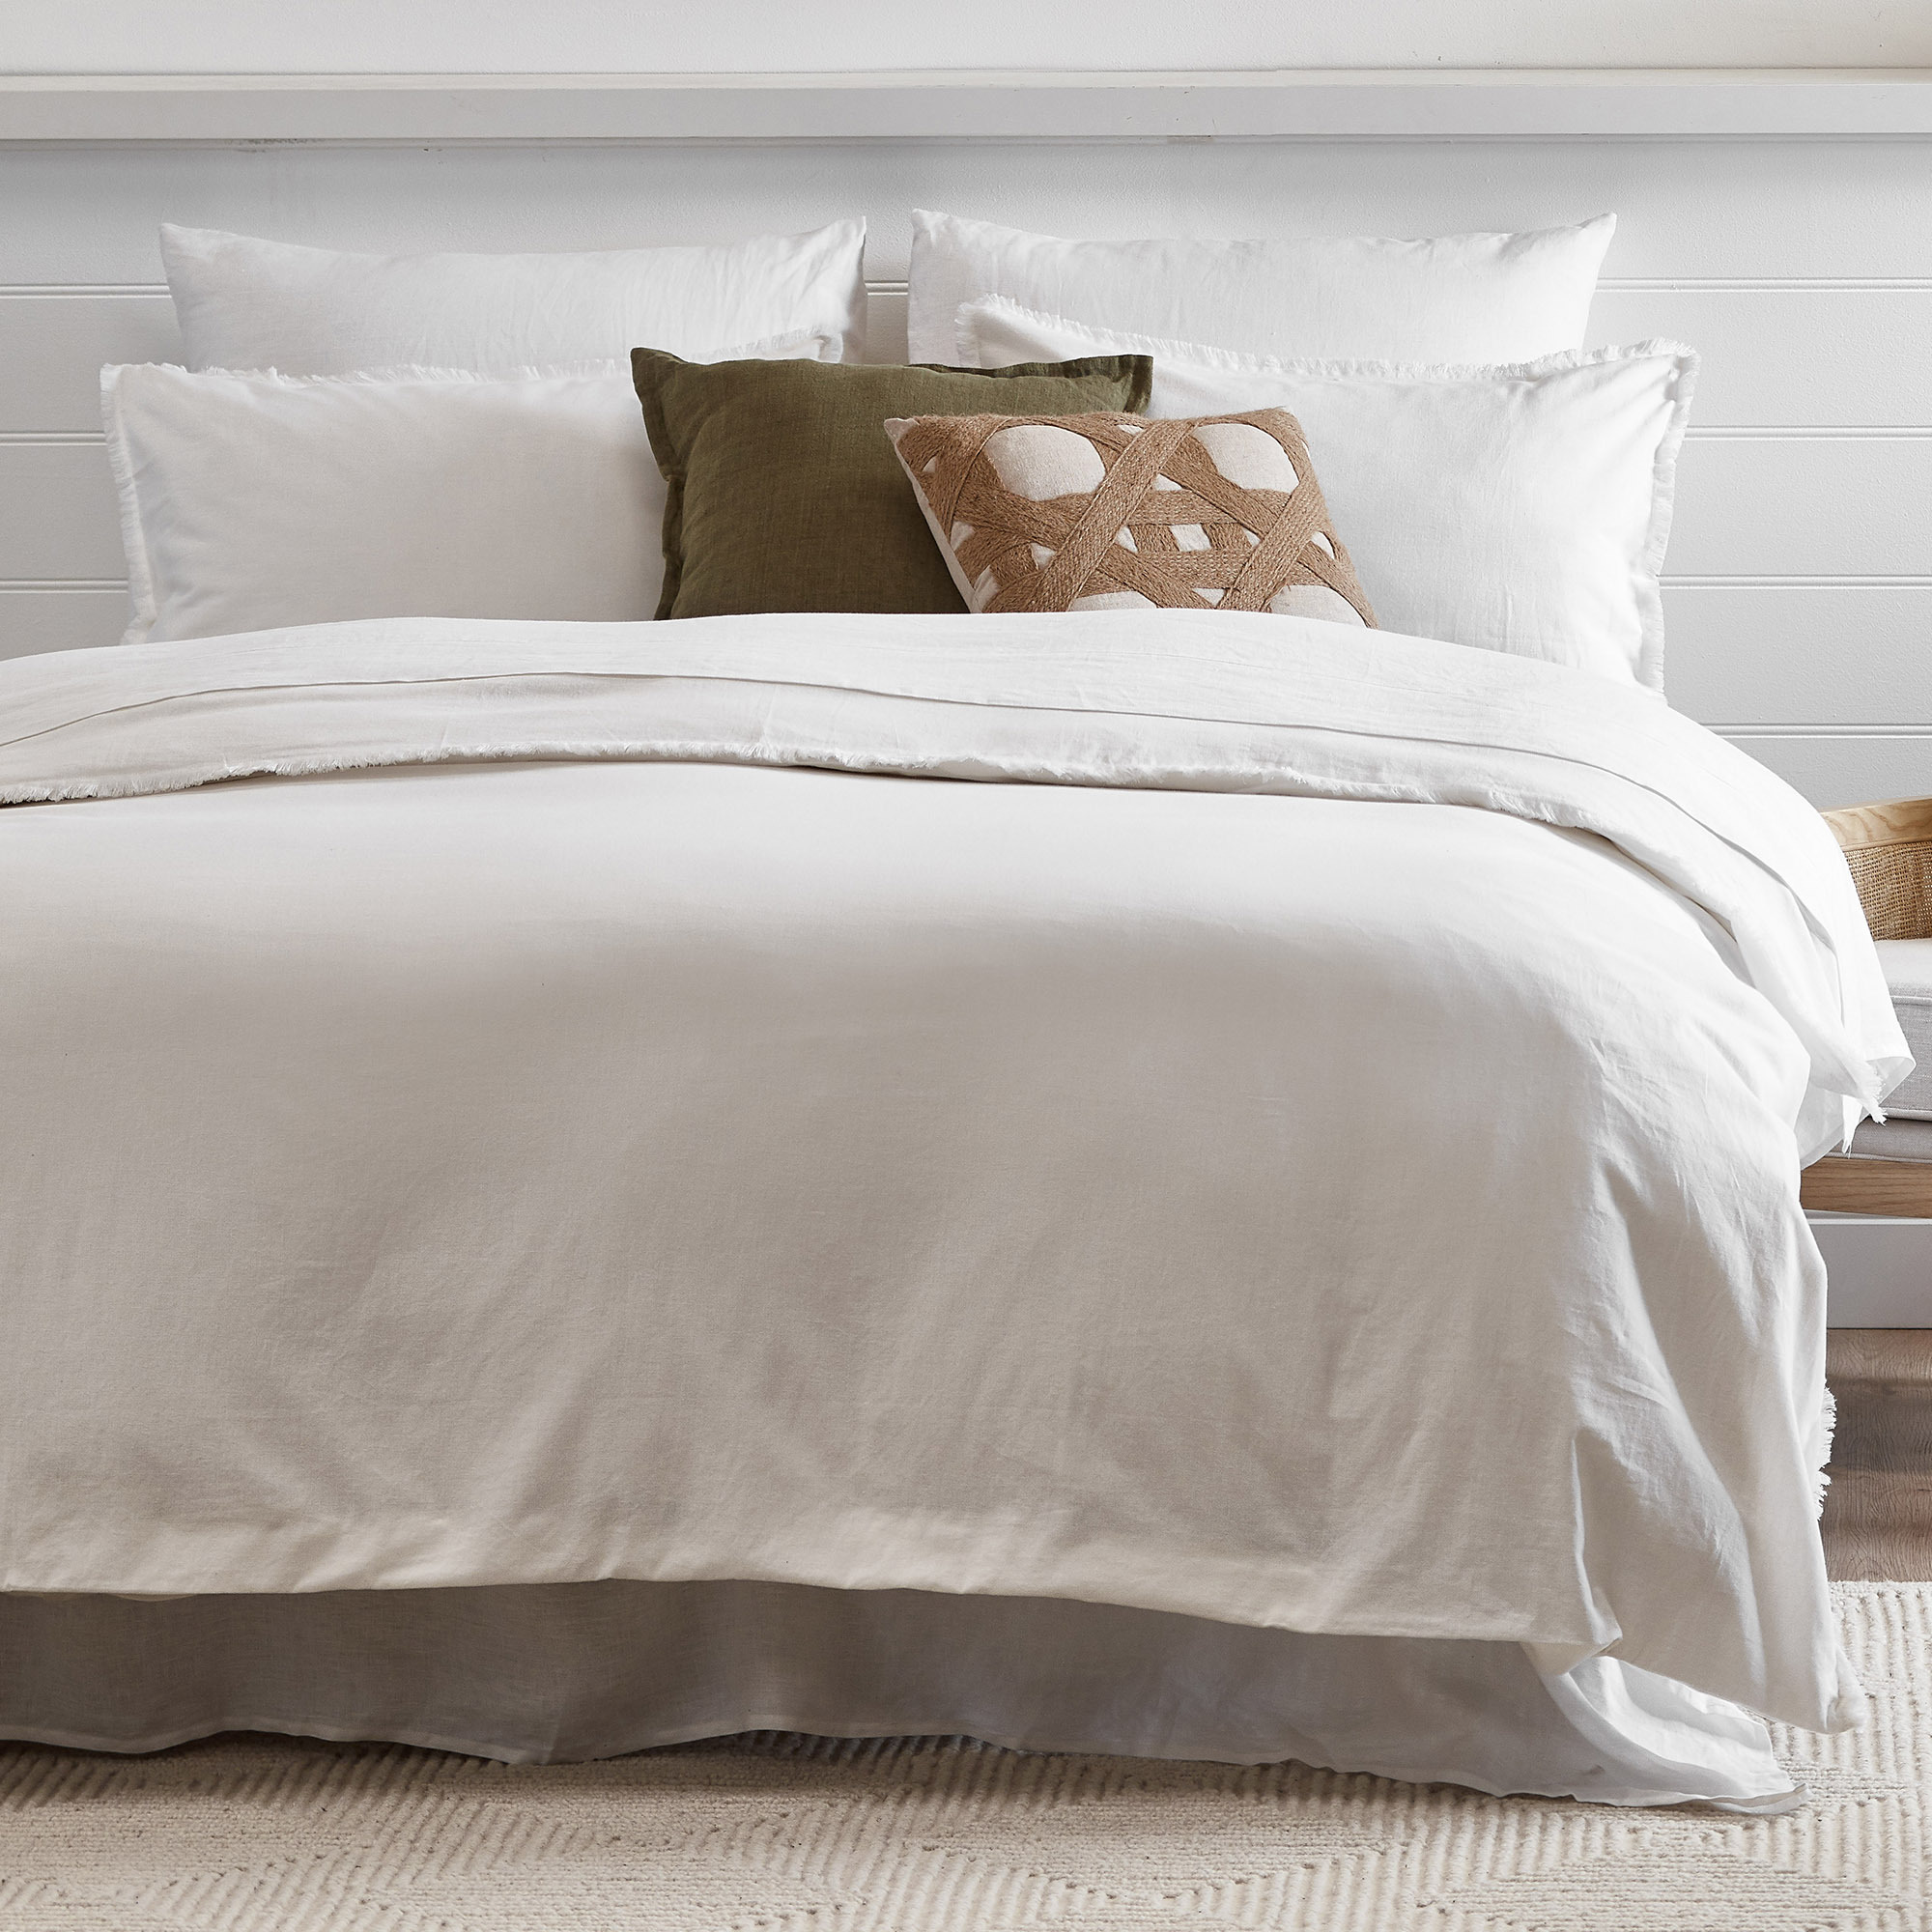 Temple Webster White Fringed Maia, Cotton Linen Duvet Cover